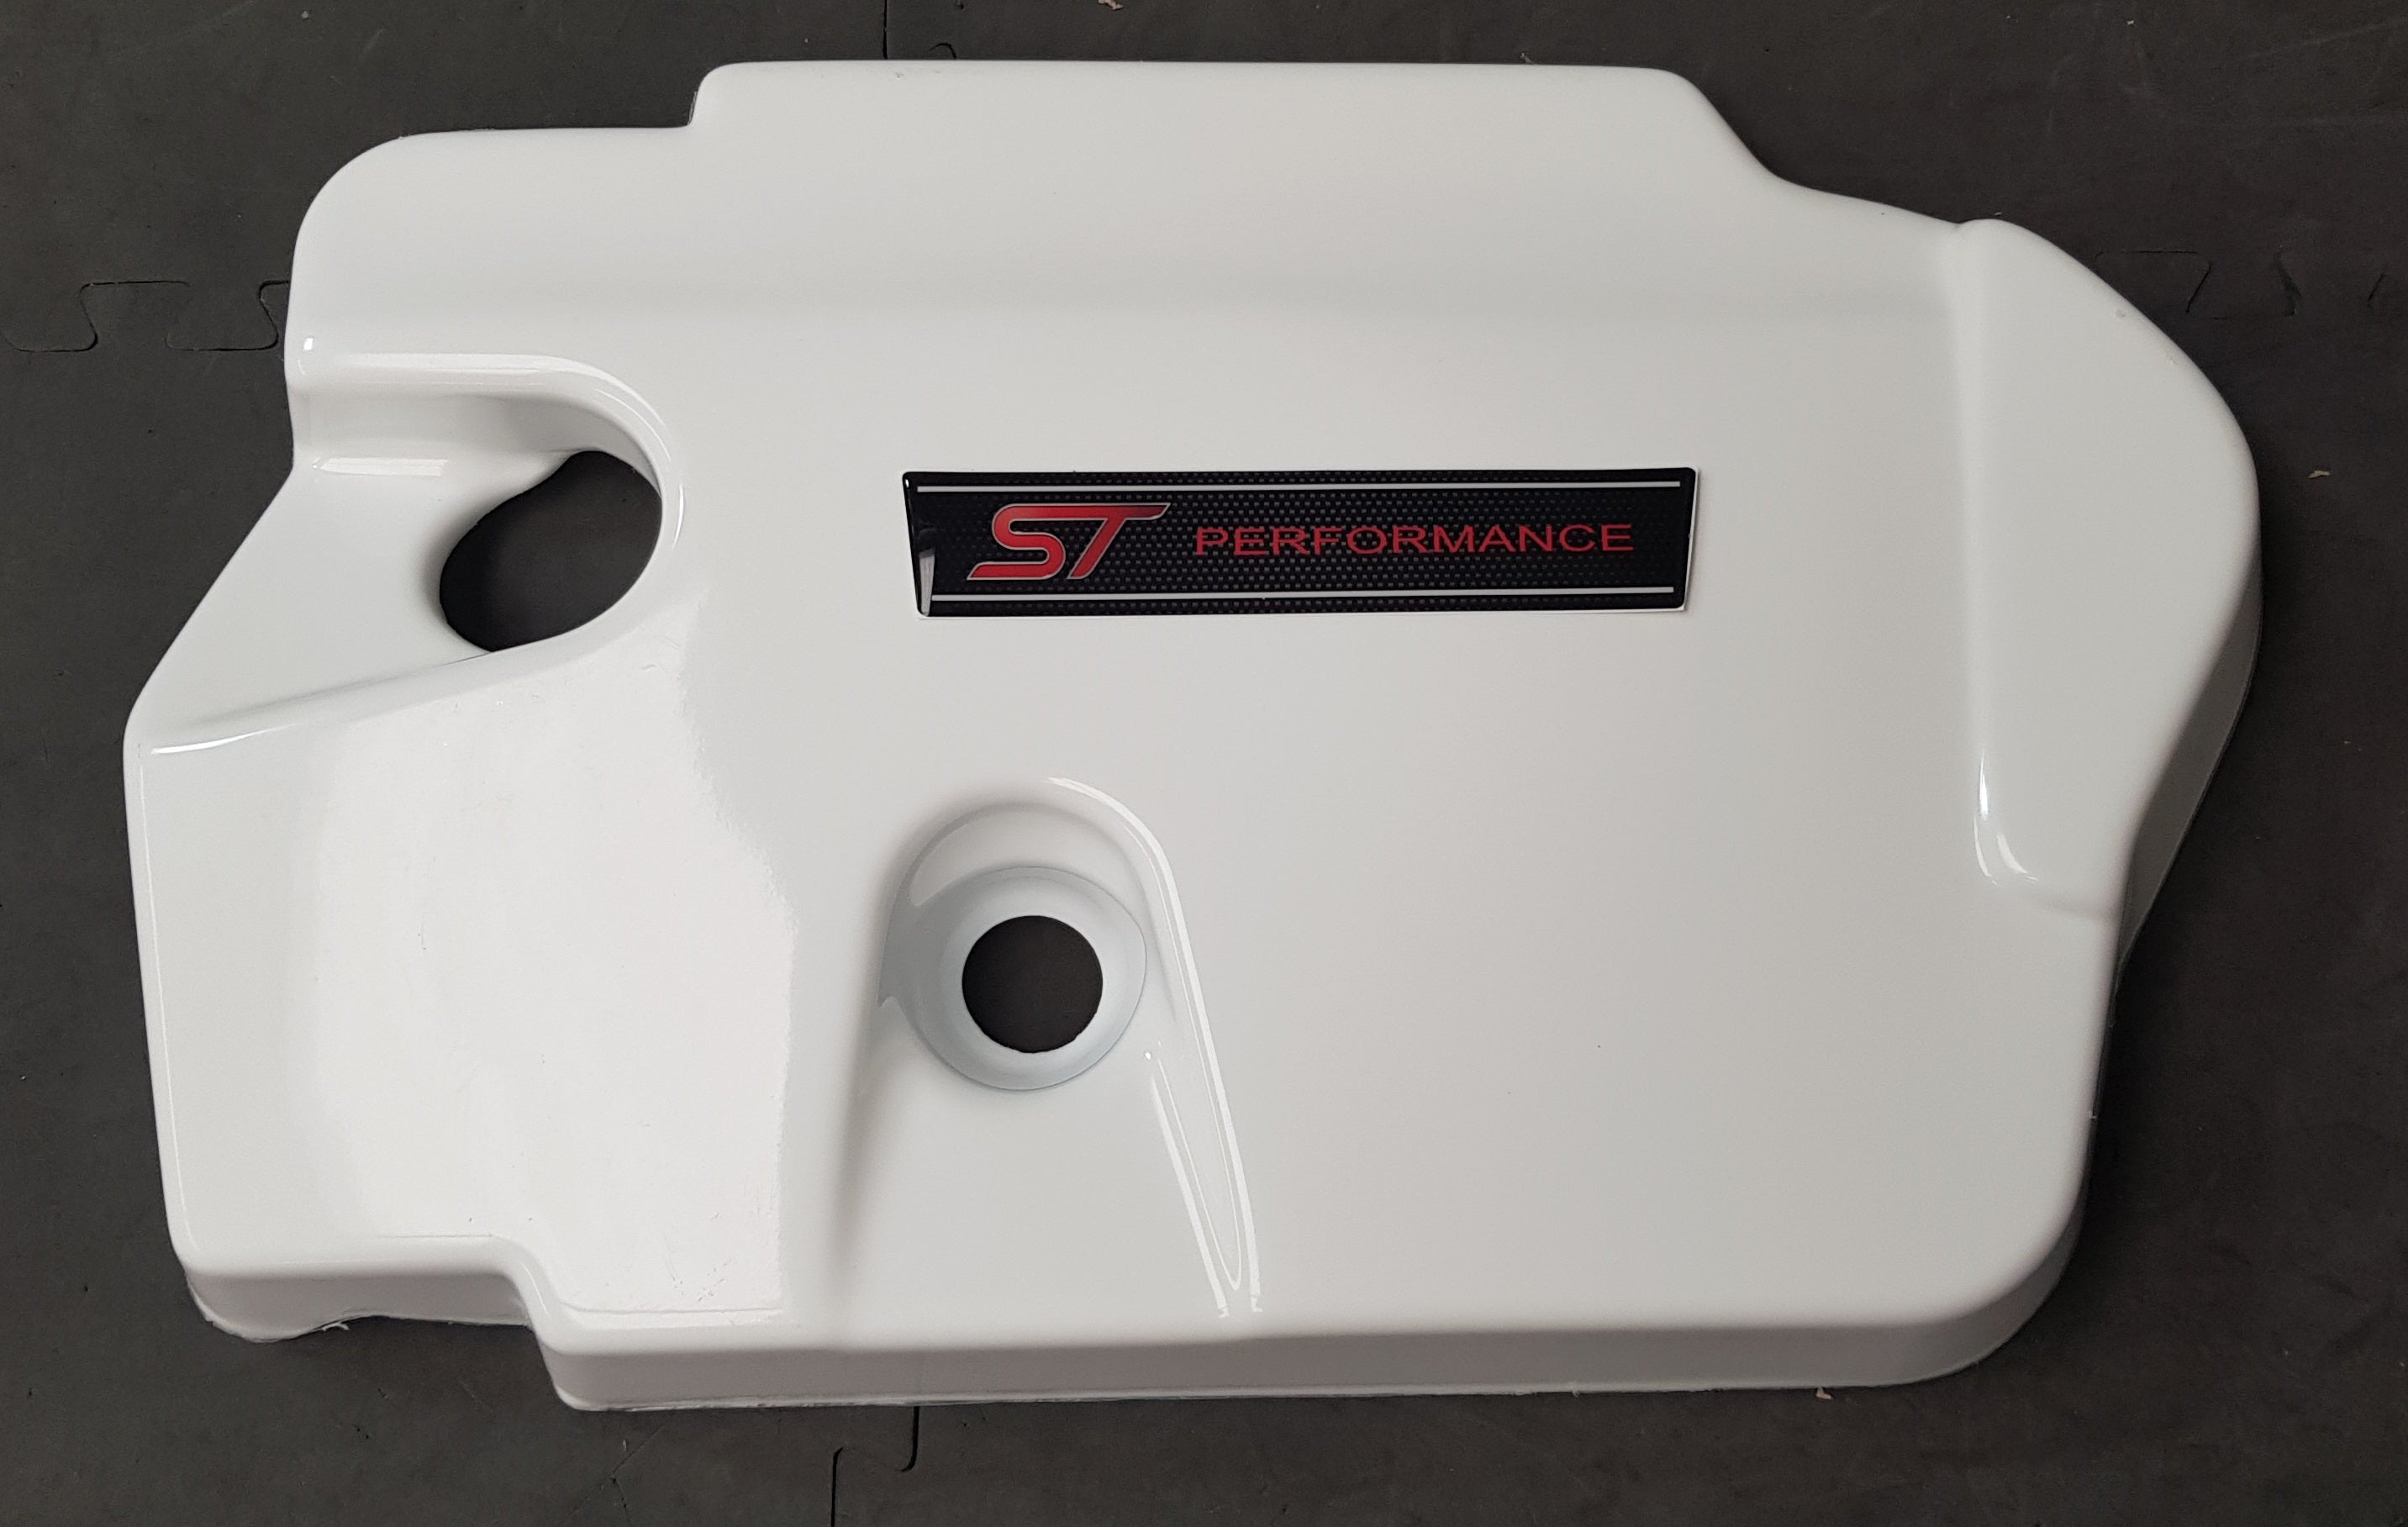 Proform Engine Cover - MK3.5 Focus ST Diesel (Painted Finishes)